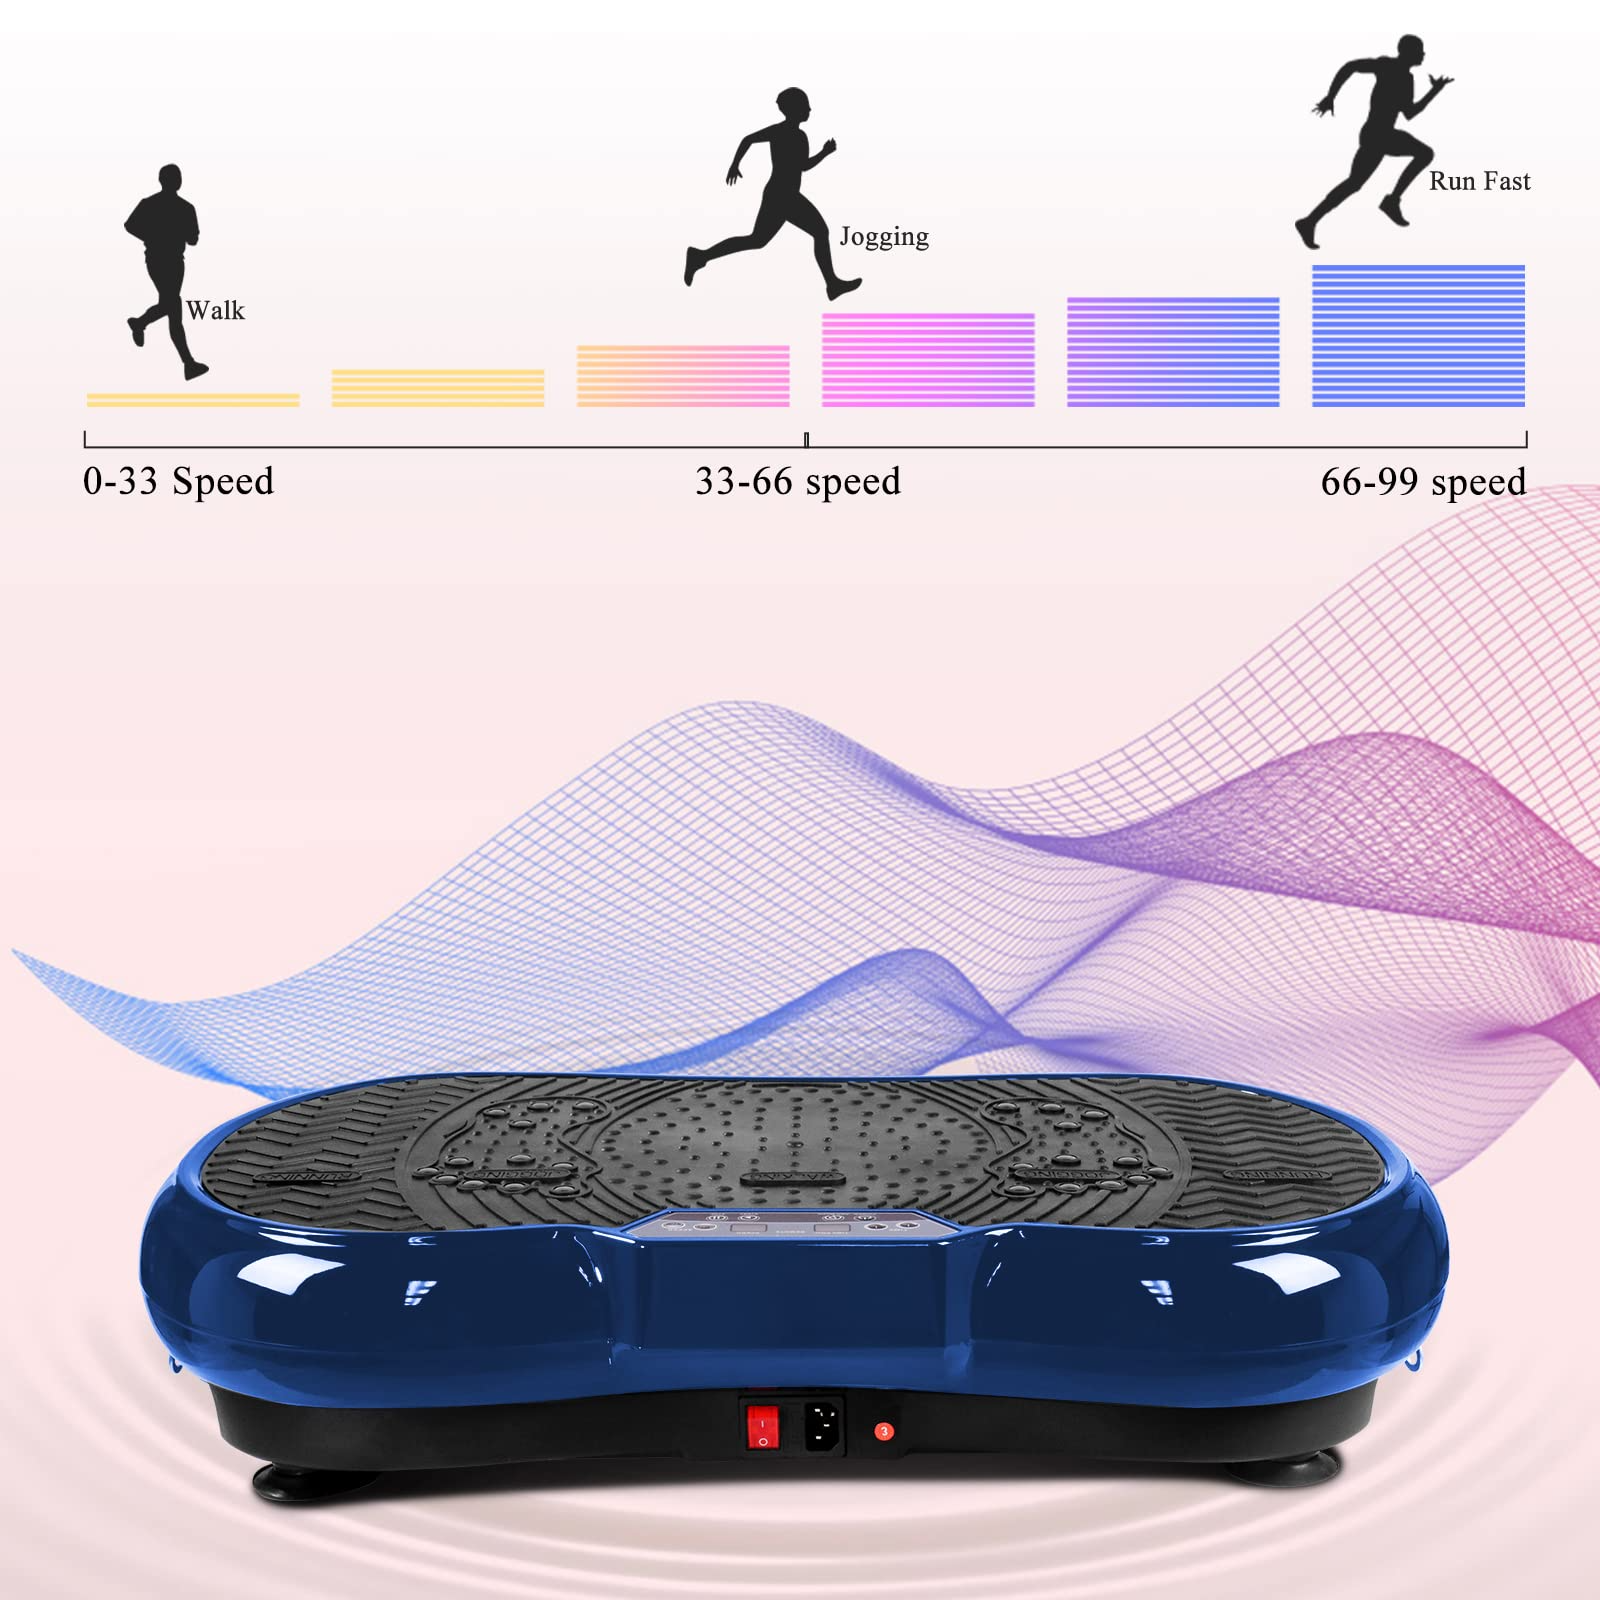 Vibration Plate Exercise Machine Whole Body Workout Fitness with